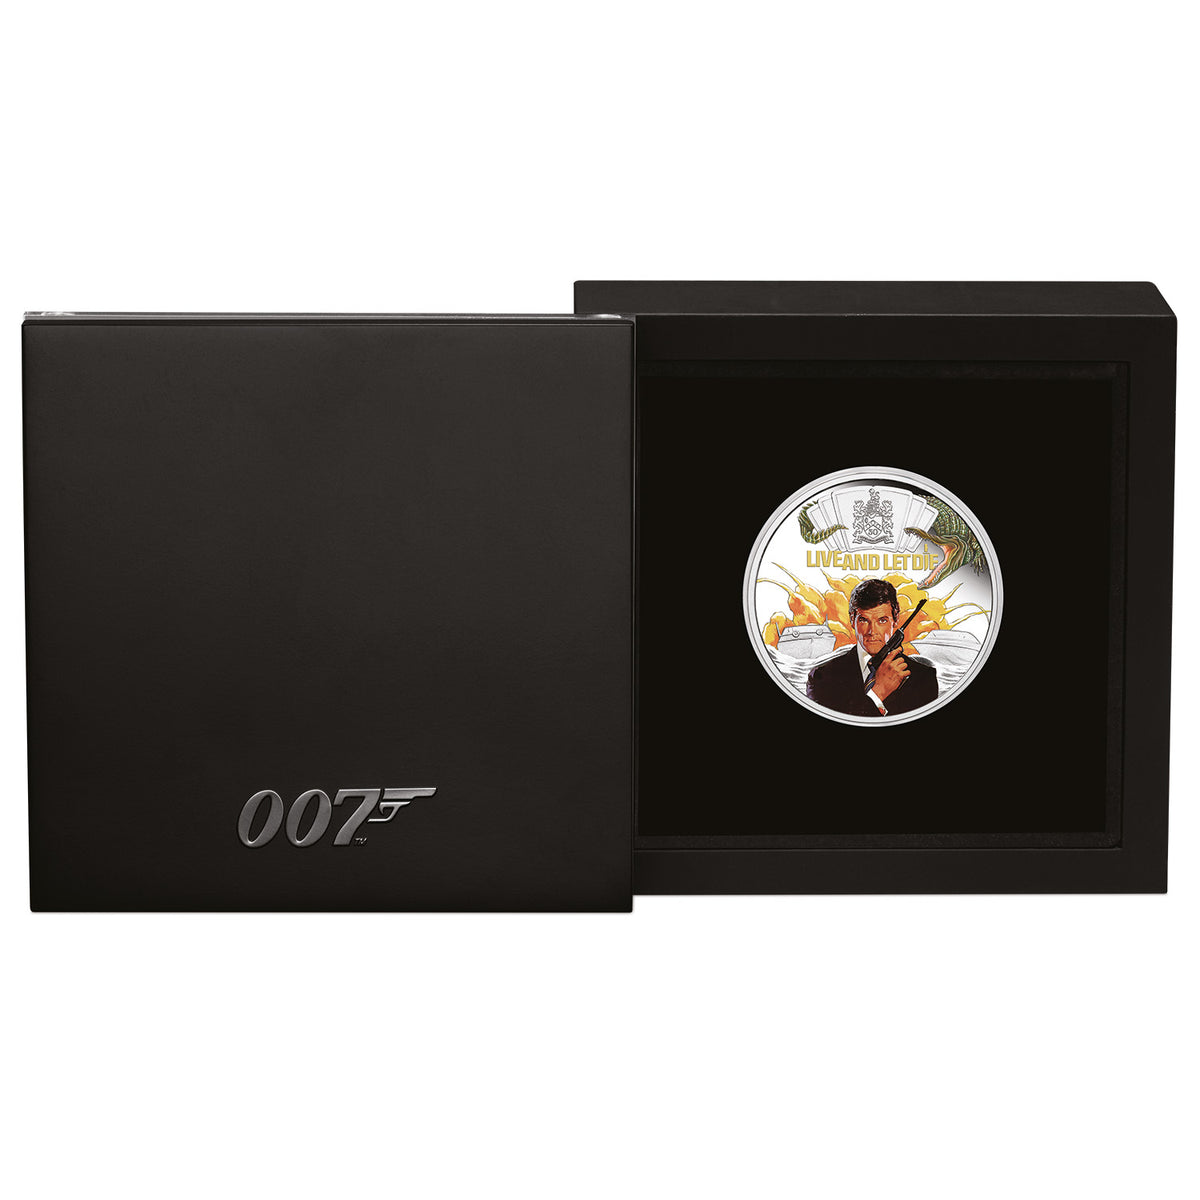 James Bond 1oz Silver Proof Coloured Coin - Live And Let Die 50th Anniversary Numbered Edition - By The Perth Mint